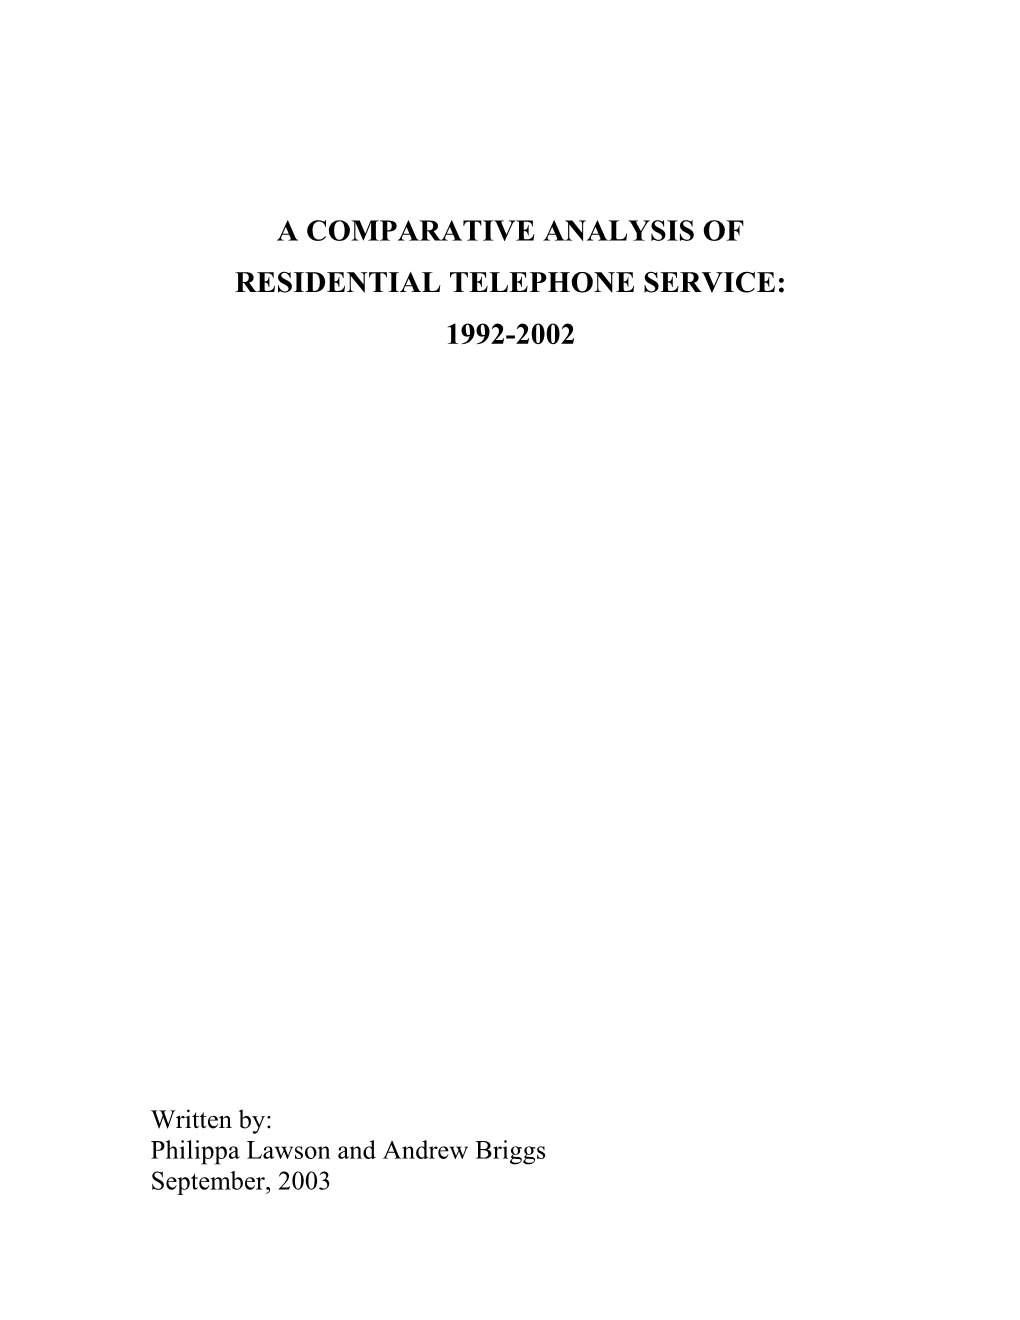 A Comparative Analysis of Residential Telephone Service: 1992-2002